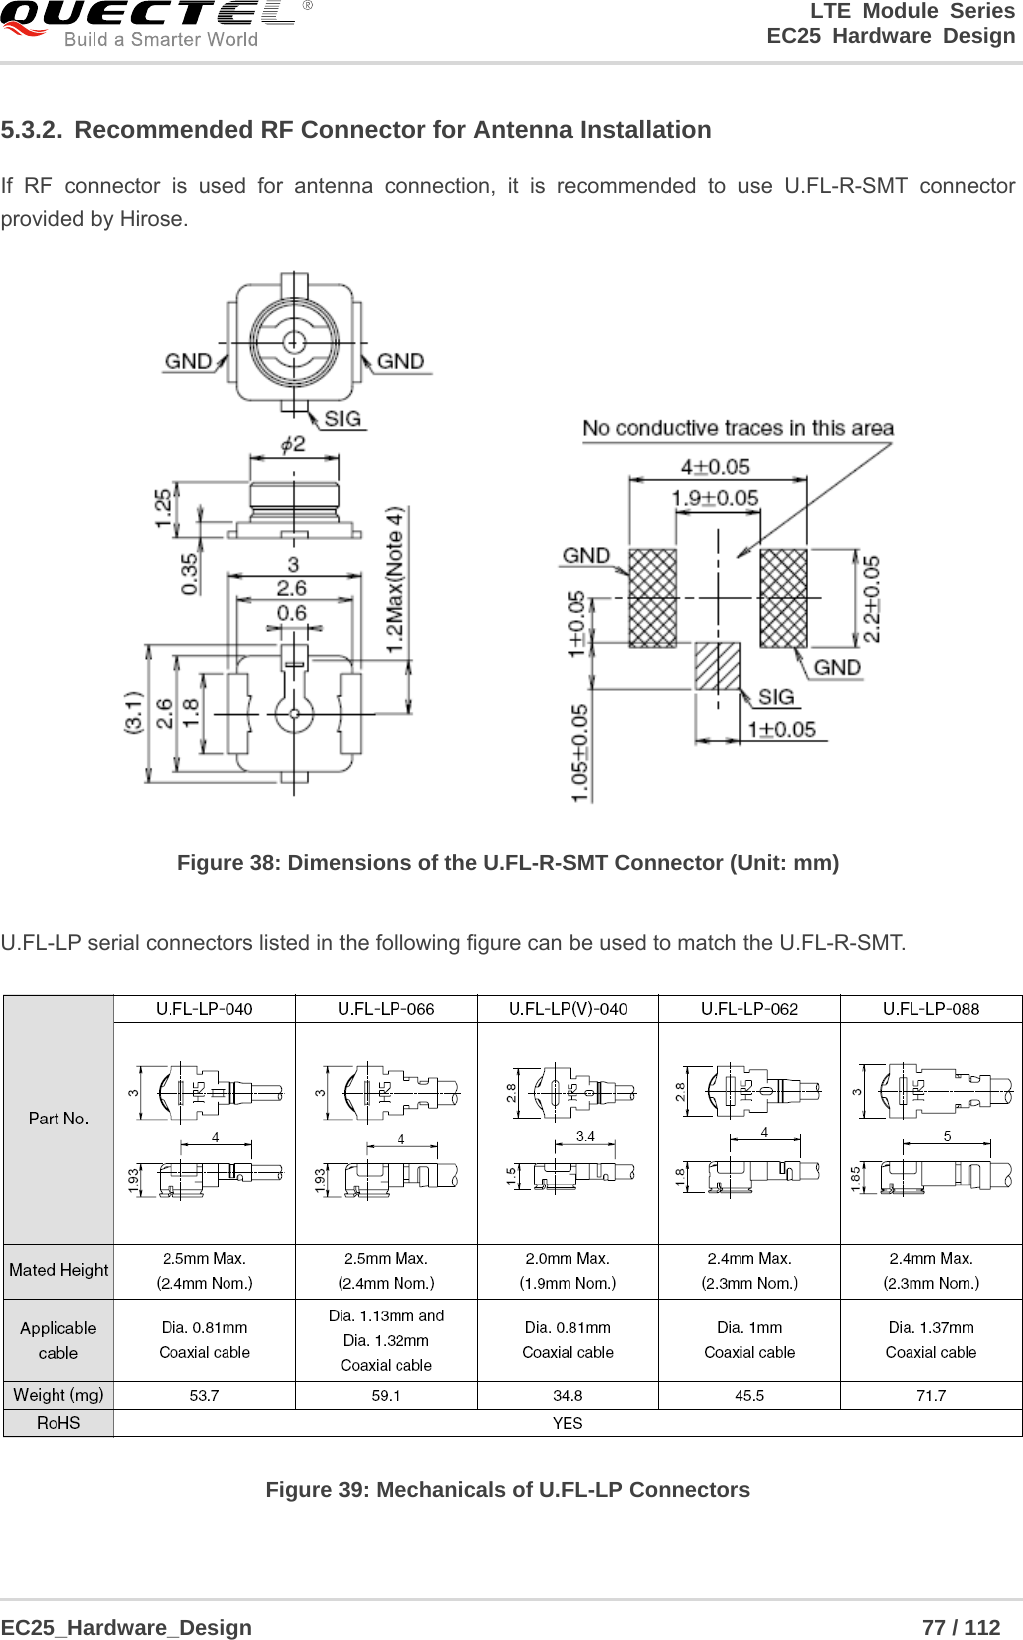 LTE Module Series                                                  EC25 Hardware Design  EC25_Hardware_Design                                                             77 / 112    5.3.2.  Recommended RF Connector for Antenna Installation If RF connector is used for antenna connection, it is recommended to use U.FL-R-SMT connector provided by Hirose.  Figure 38: Dimensions of the U.FL-R-SMT Connector (Unit: mm)  U.FL-LP serial connectors listed in the following figure can be used to match the U.FL-R-SMT.  Figure 39: Mechanicals of U.FL-LP Connectors 